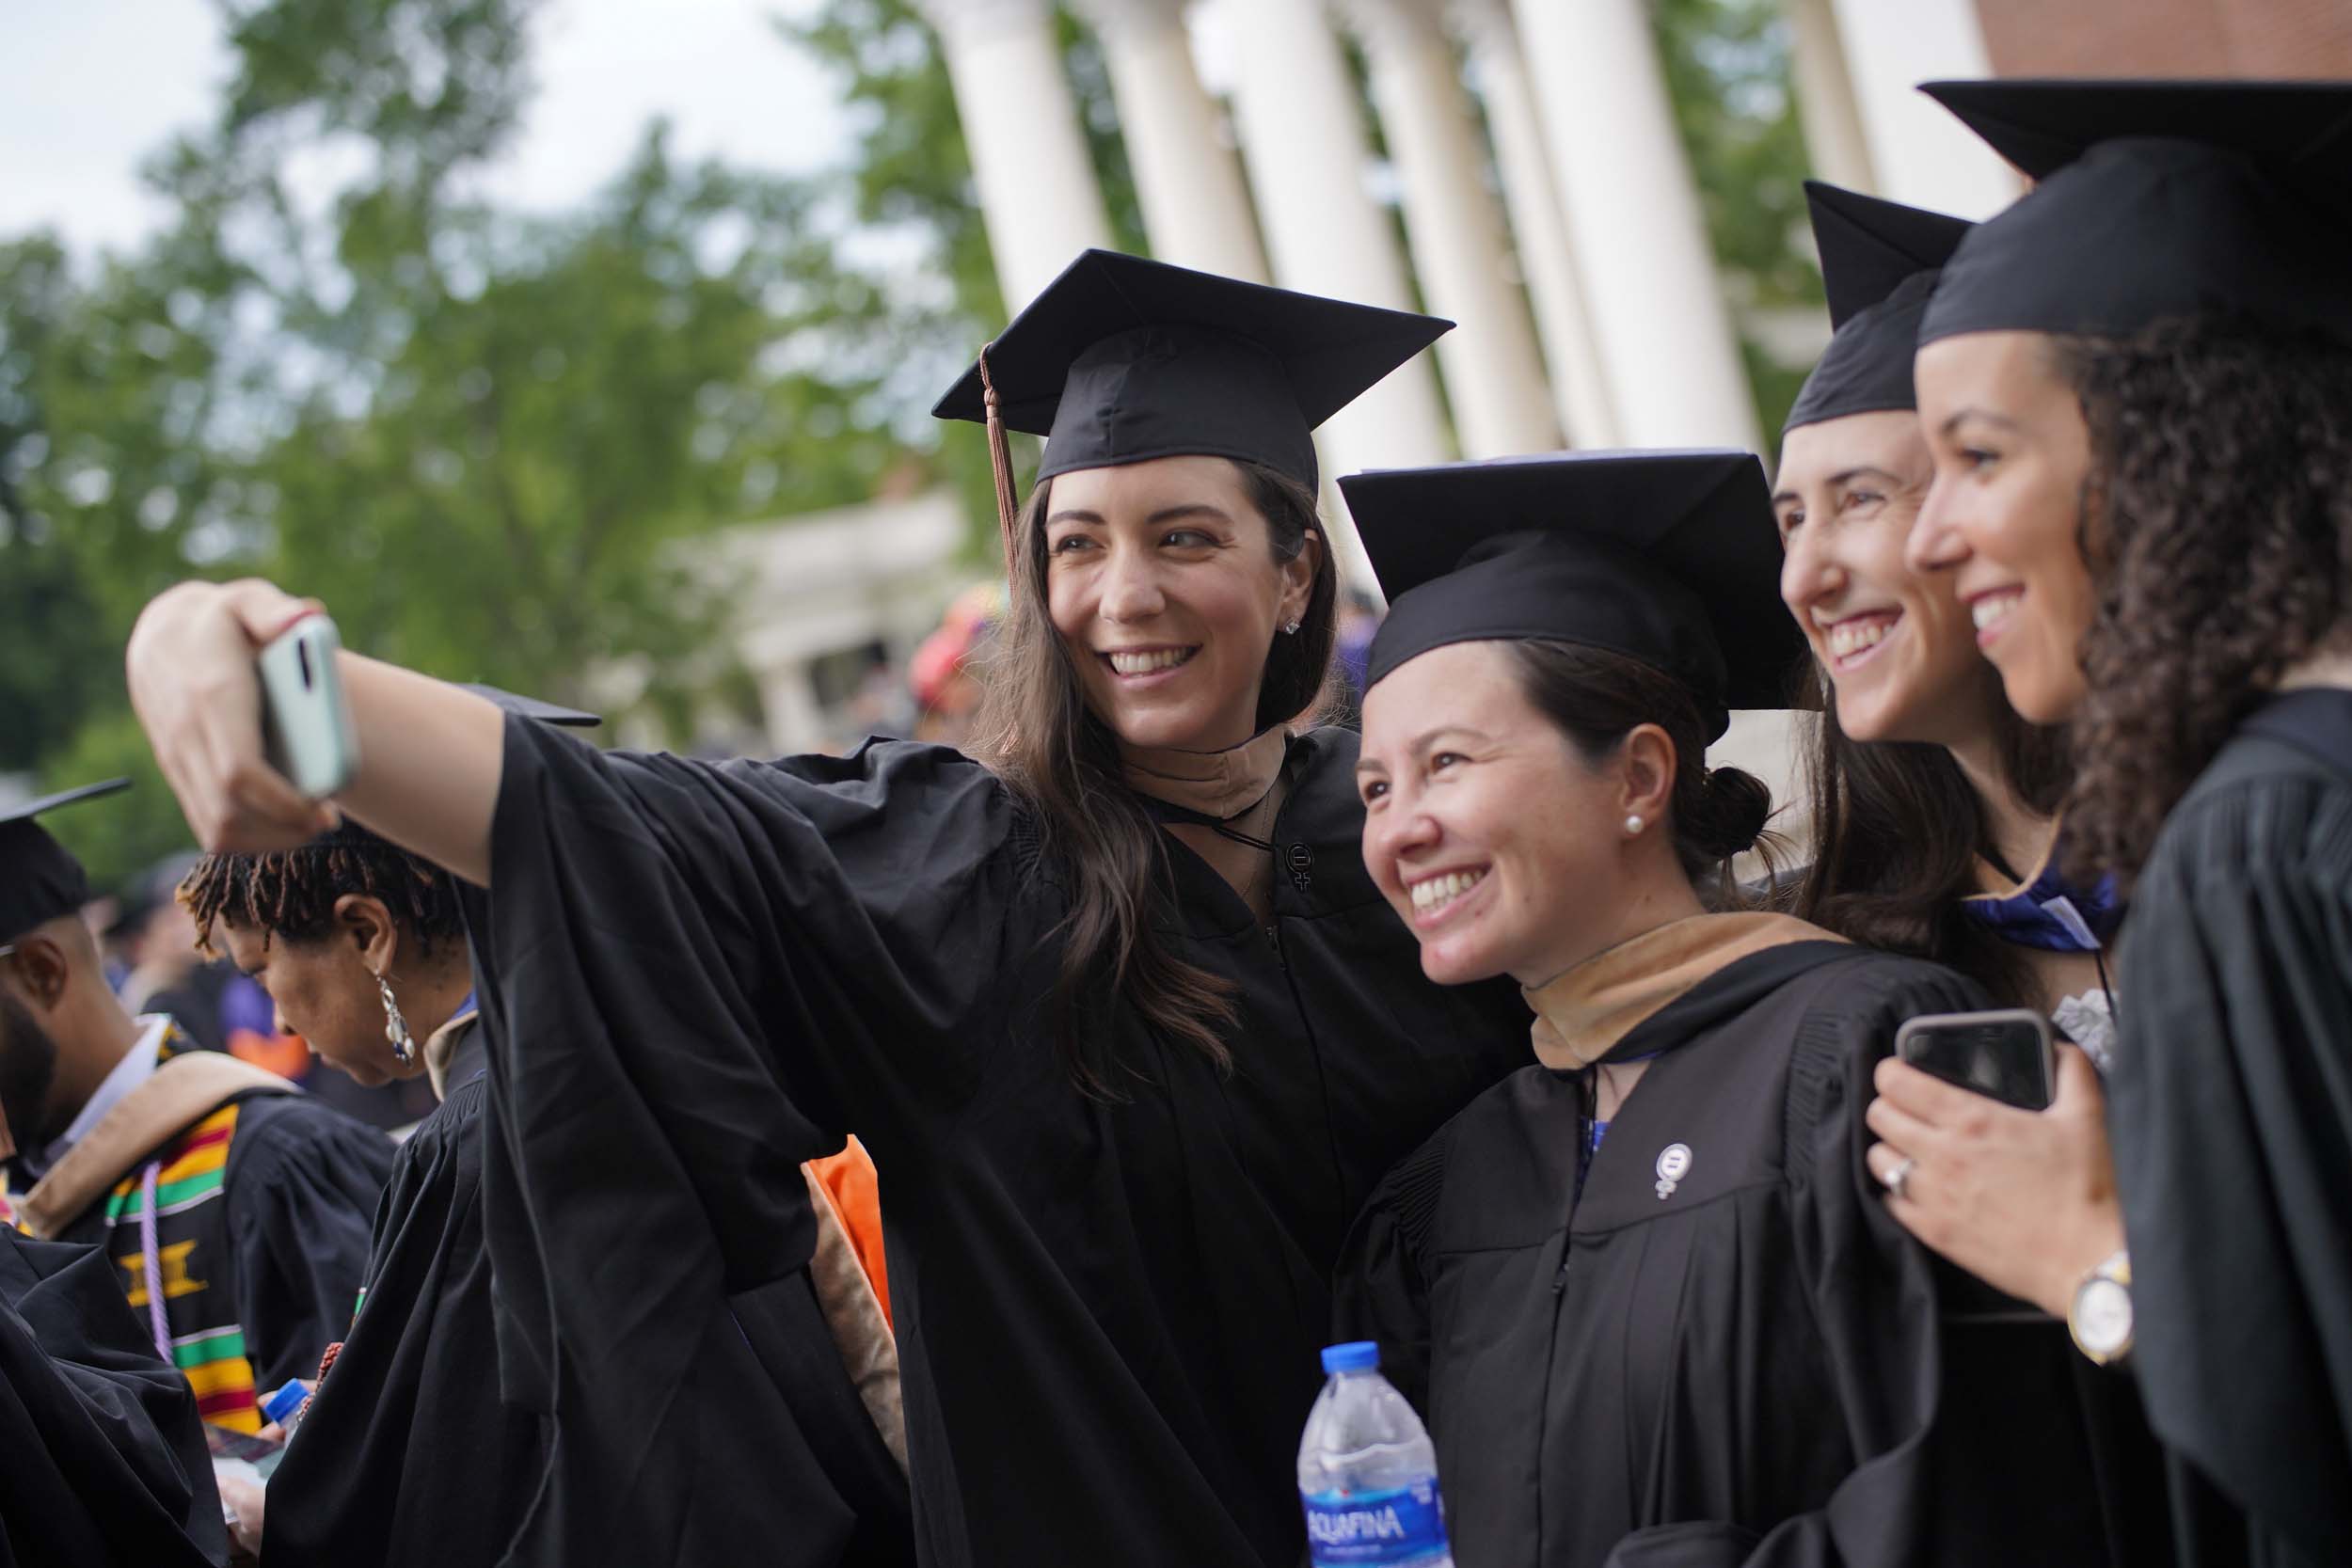 Graduates pose together for a group selfie